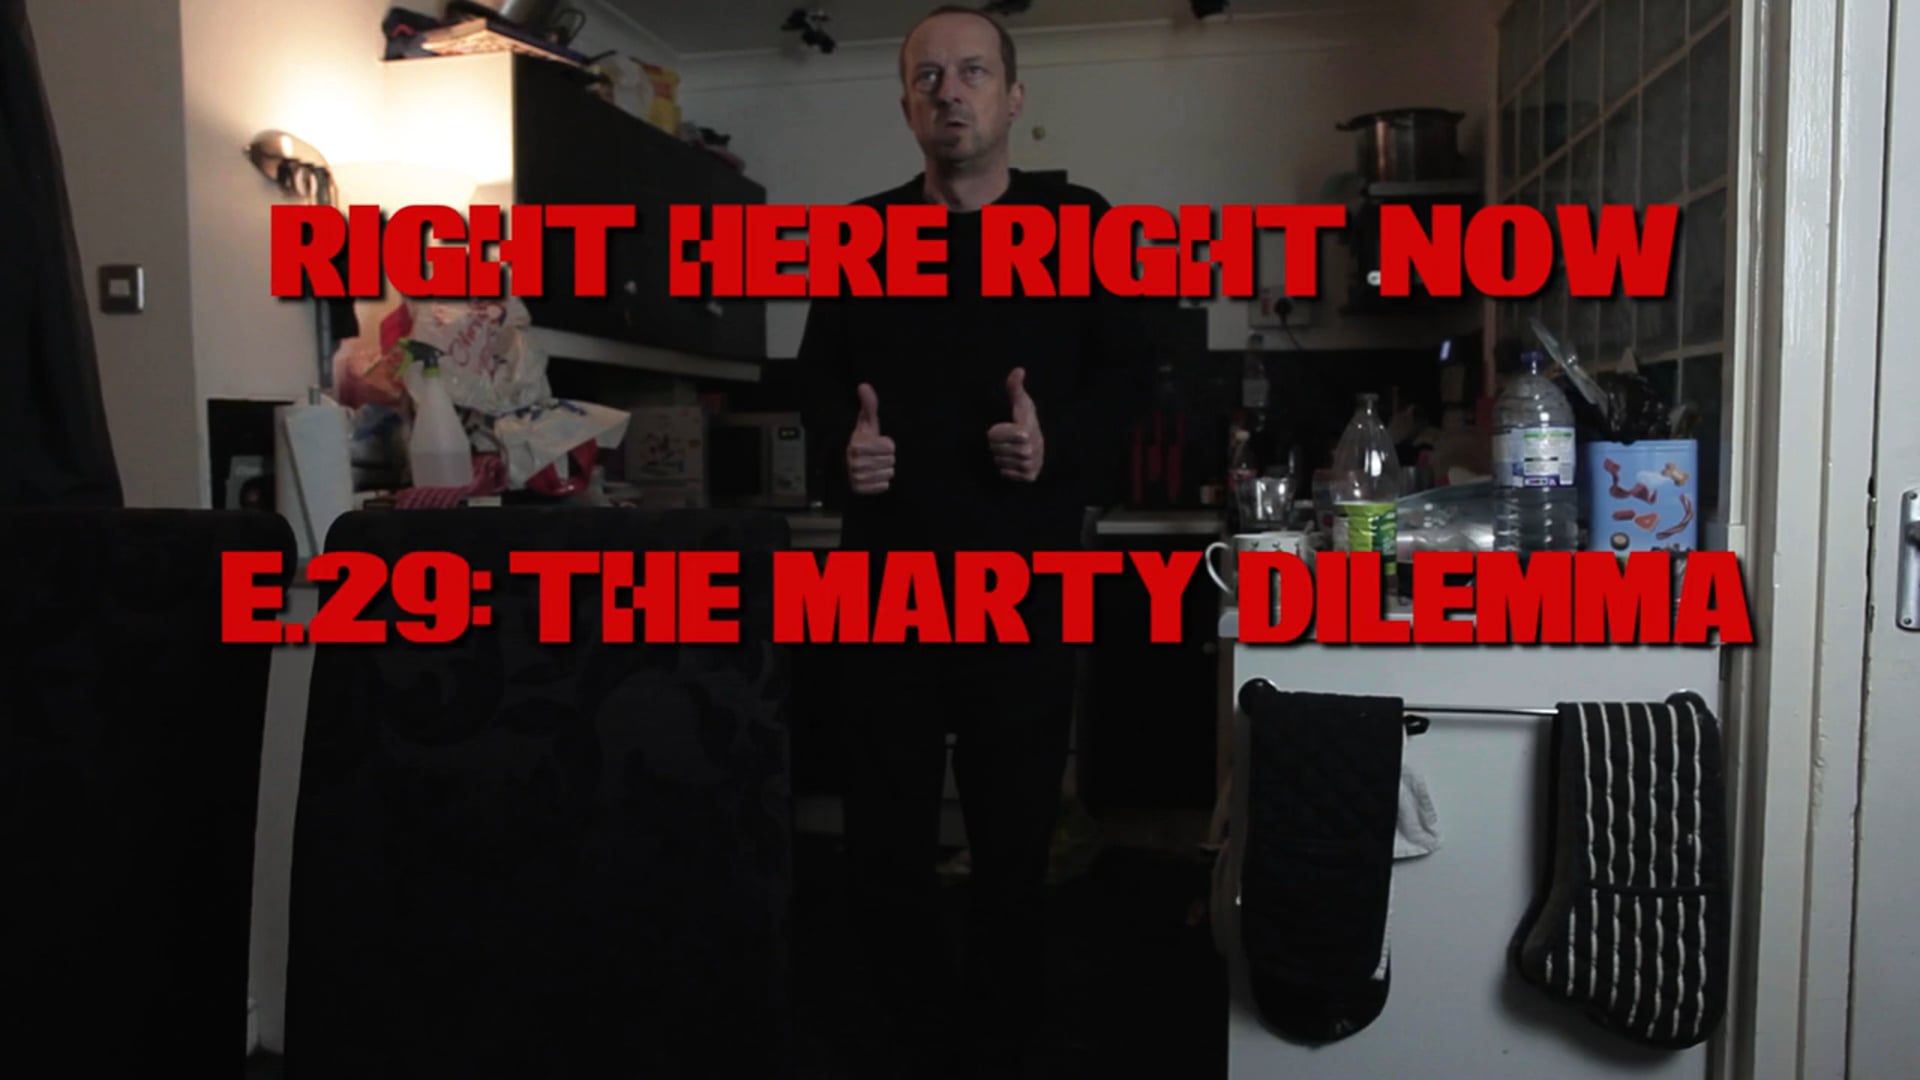 Watch Right Here Right Now: Episode 29 (The Marty Dilemma) on our Free Roku Channel